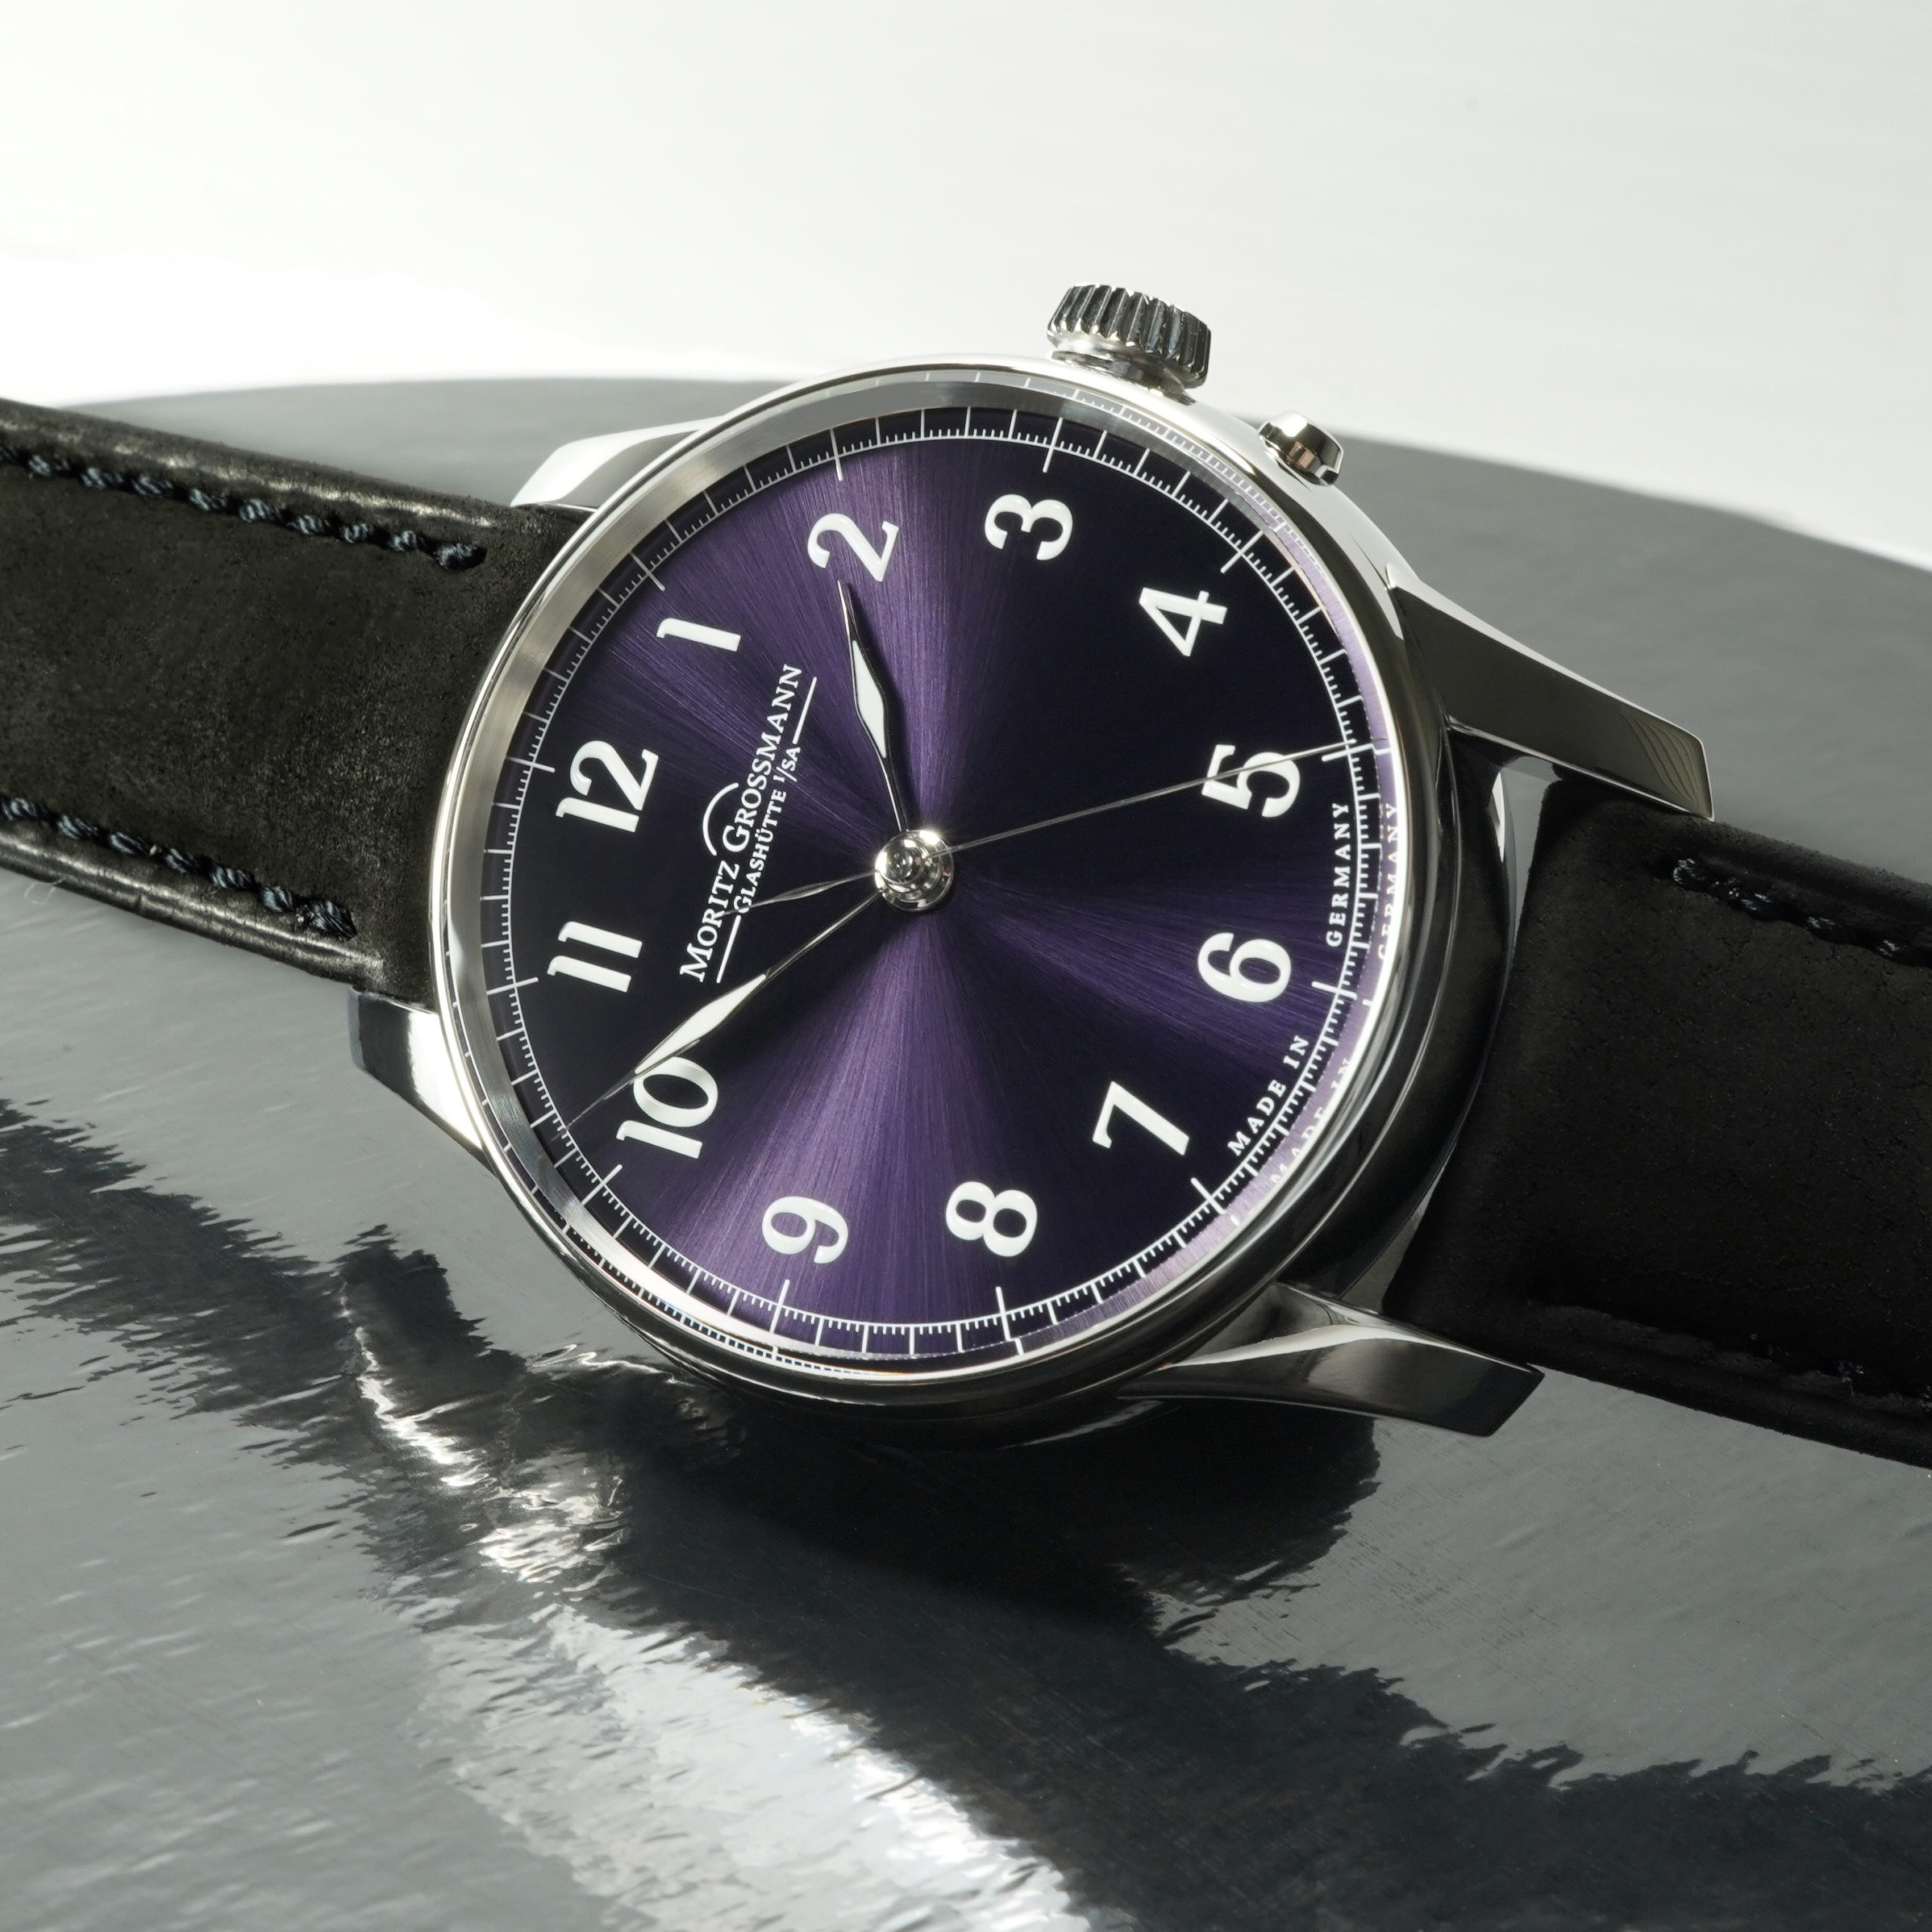 Purplicious: Moritz Grossmann Introduces a New Variant of the Central Second